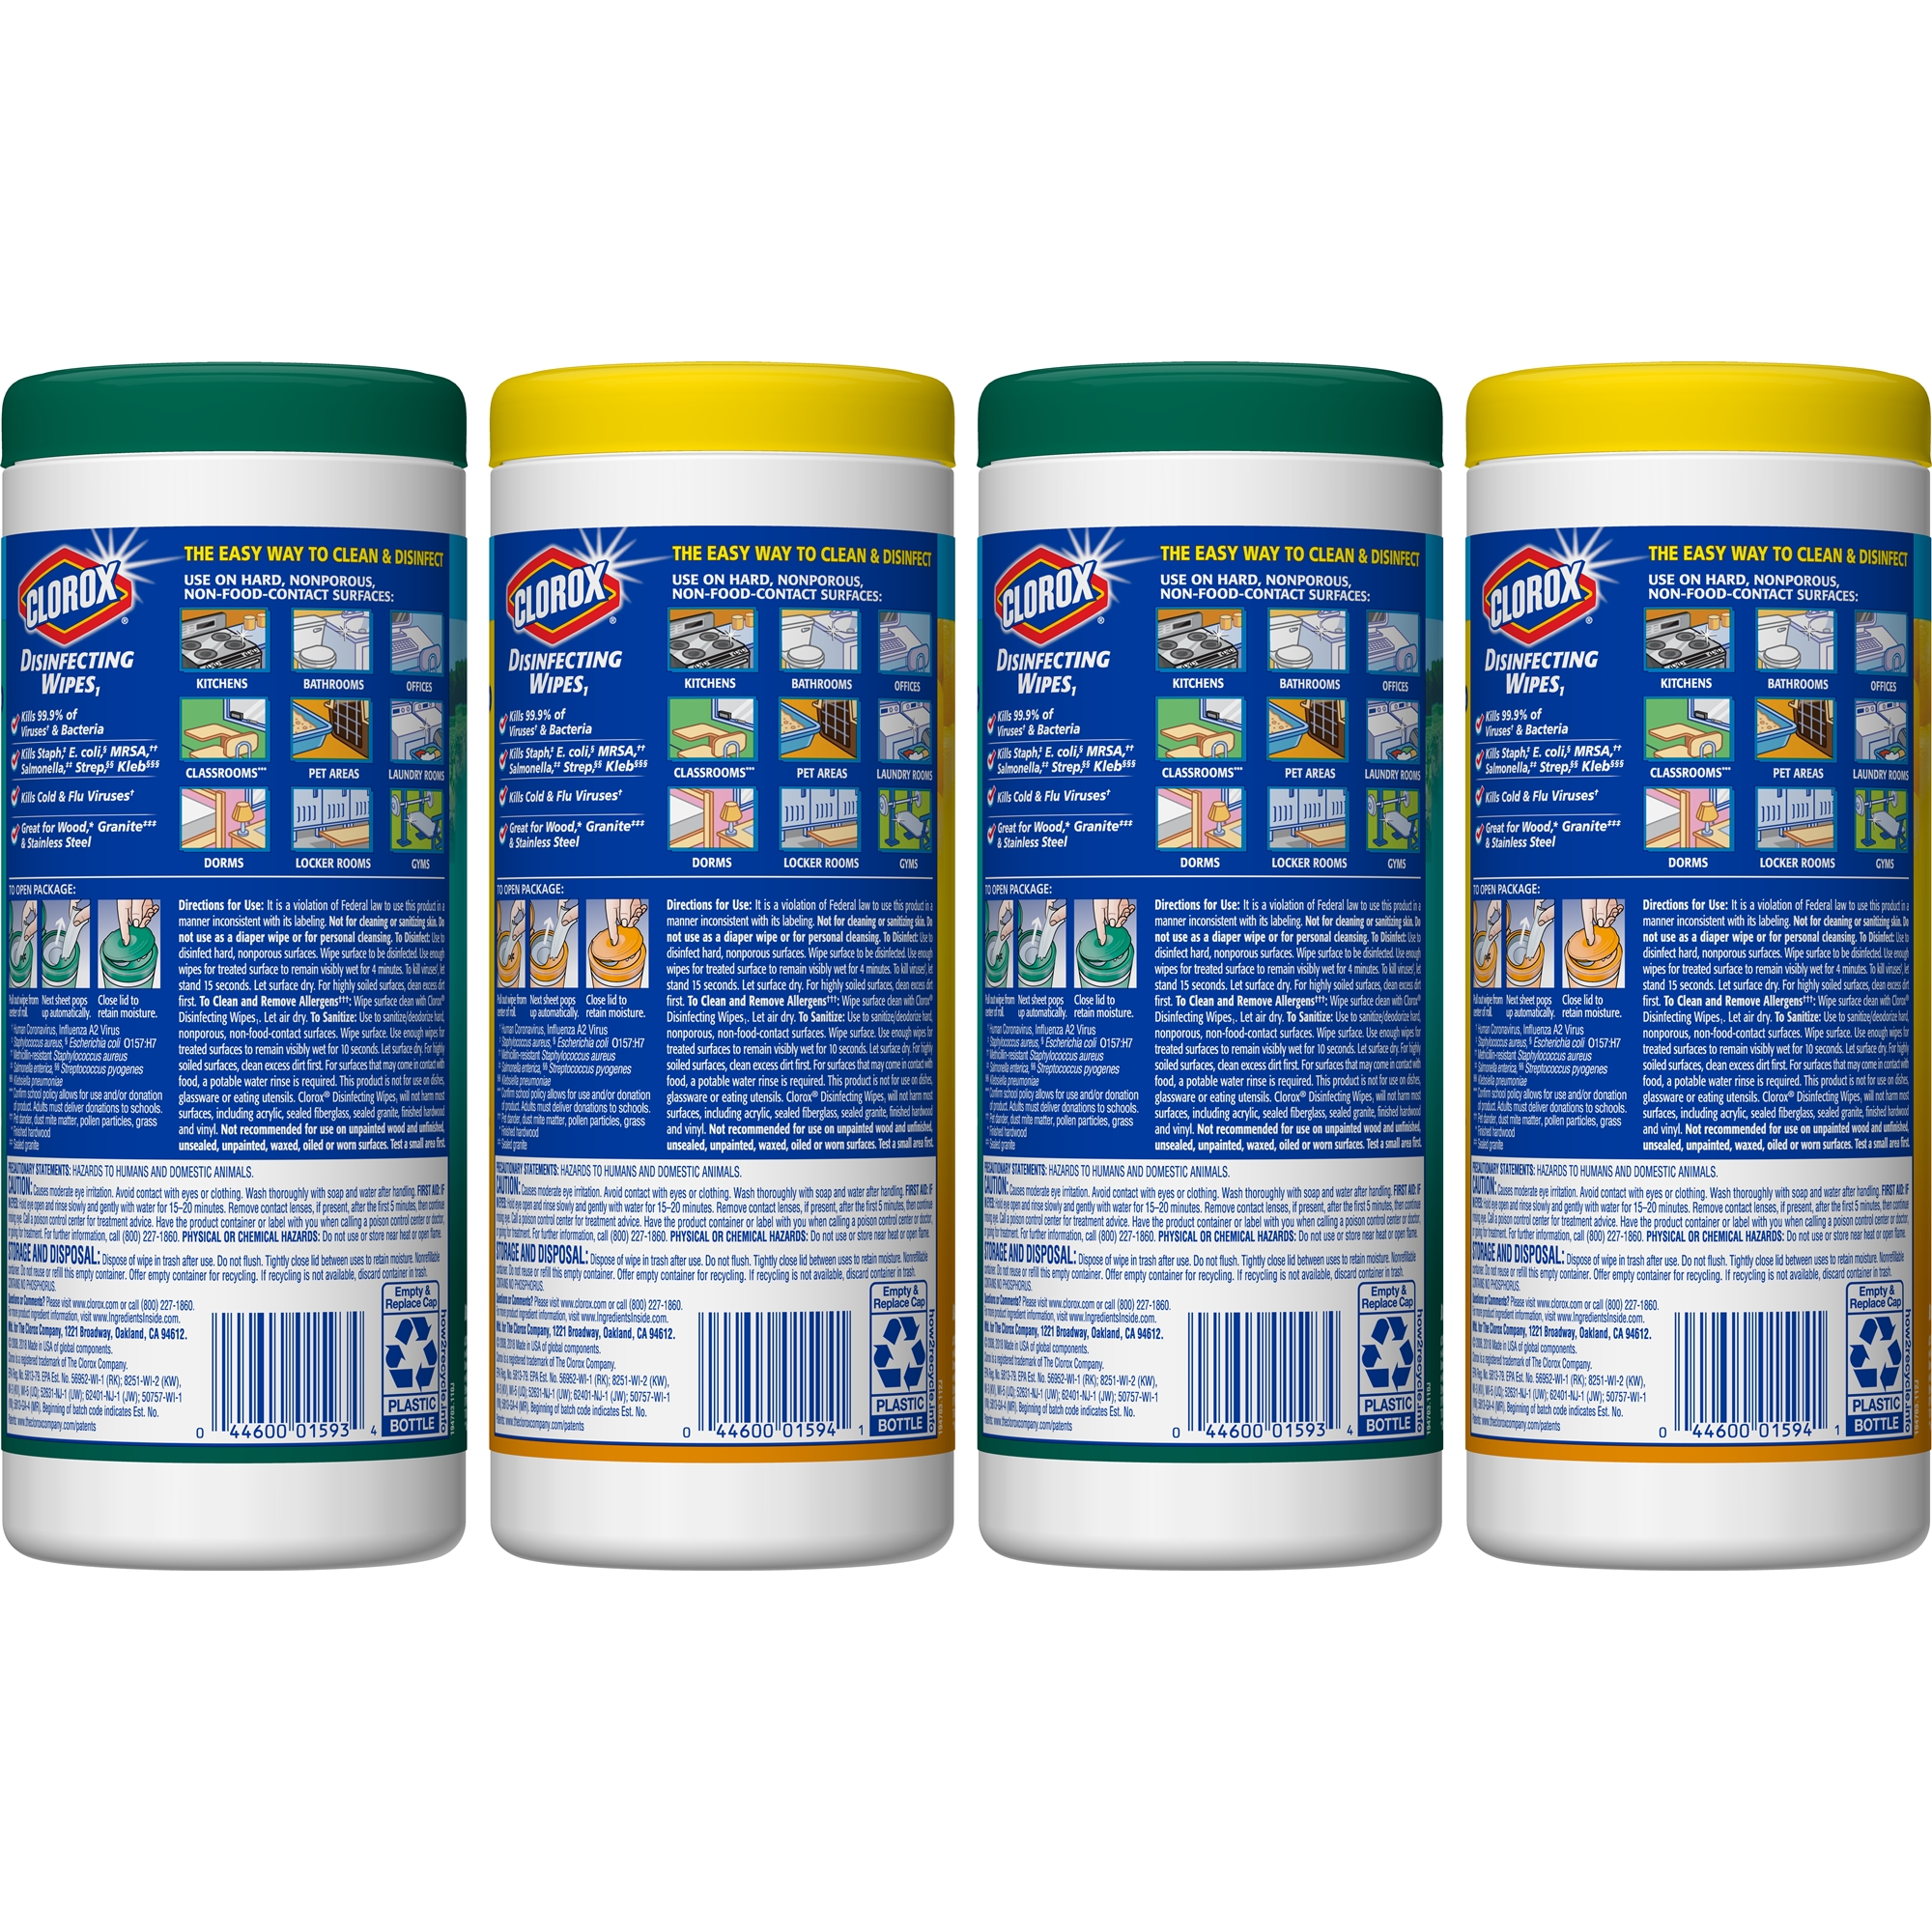 Clorox Disinfecting Wipes (140 Count Value Pack), Bleach Free Cleaning Wipes - 4 Pack - 35 Count Each - image 4 of 12